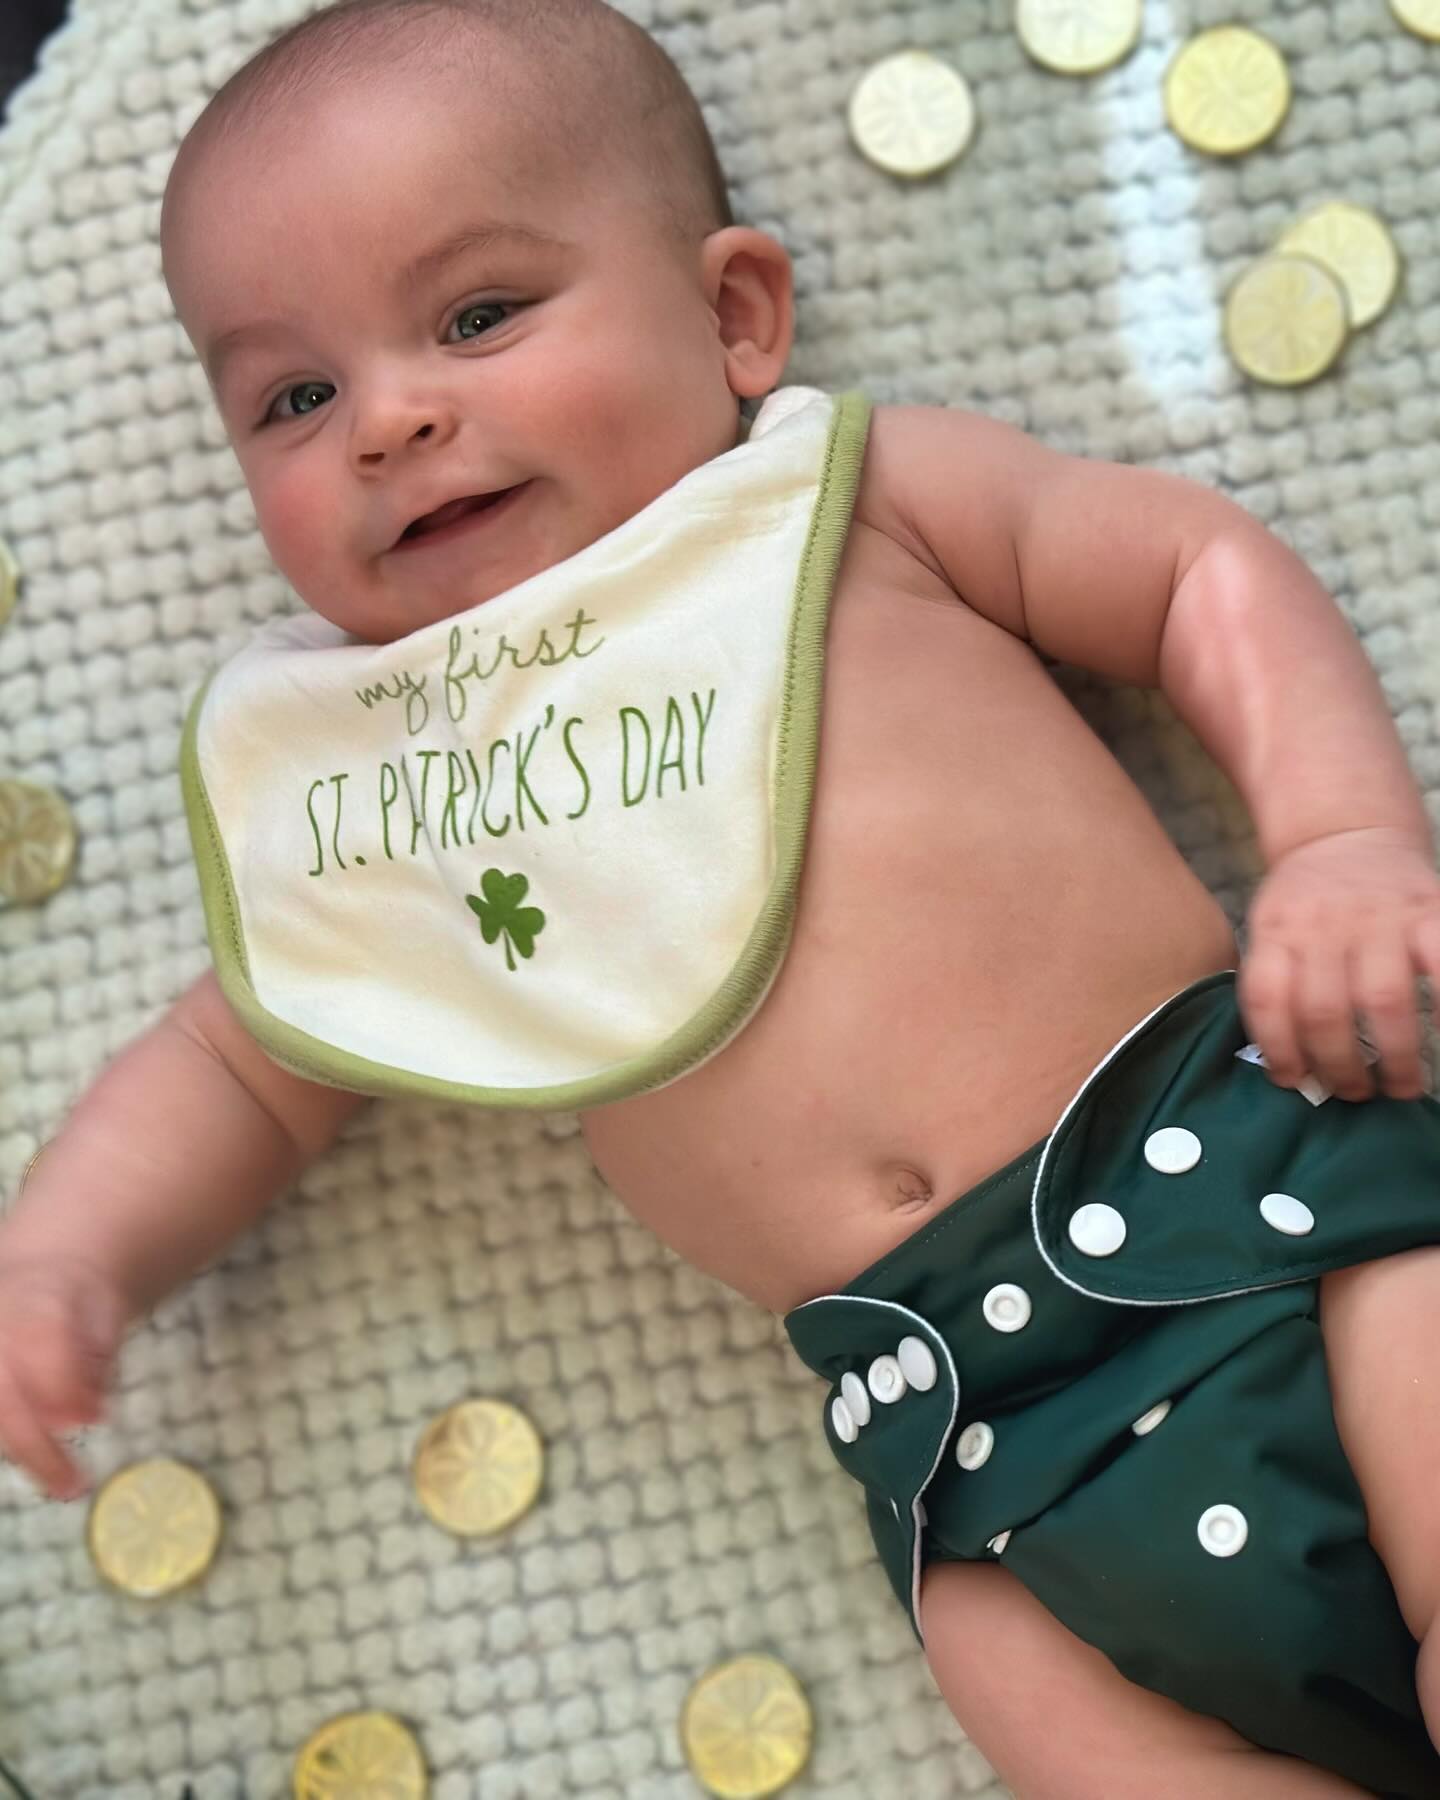 Alaric’s first St. Patrick’s Day! 🍀

Diaper🧷: @norasnursery 💚